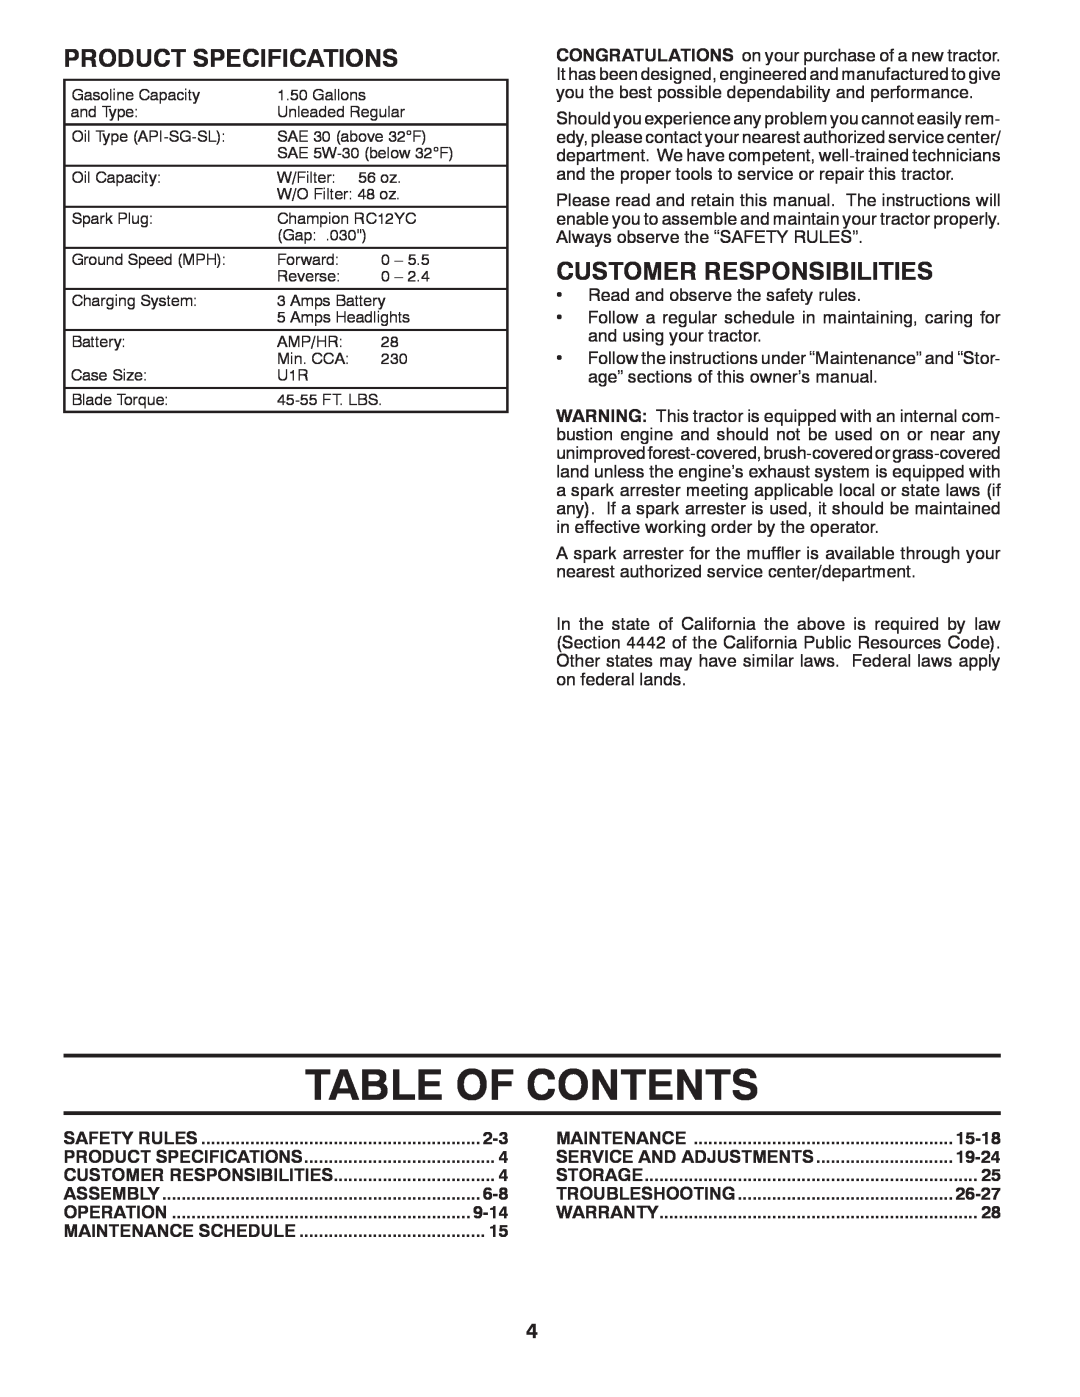 Poulan PB20H42LT manual Table Of Contents, Product Specifications, Customer Responsibilities 